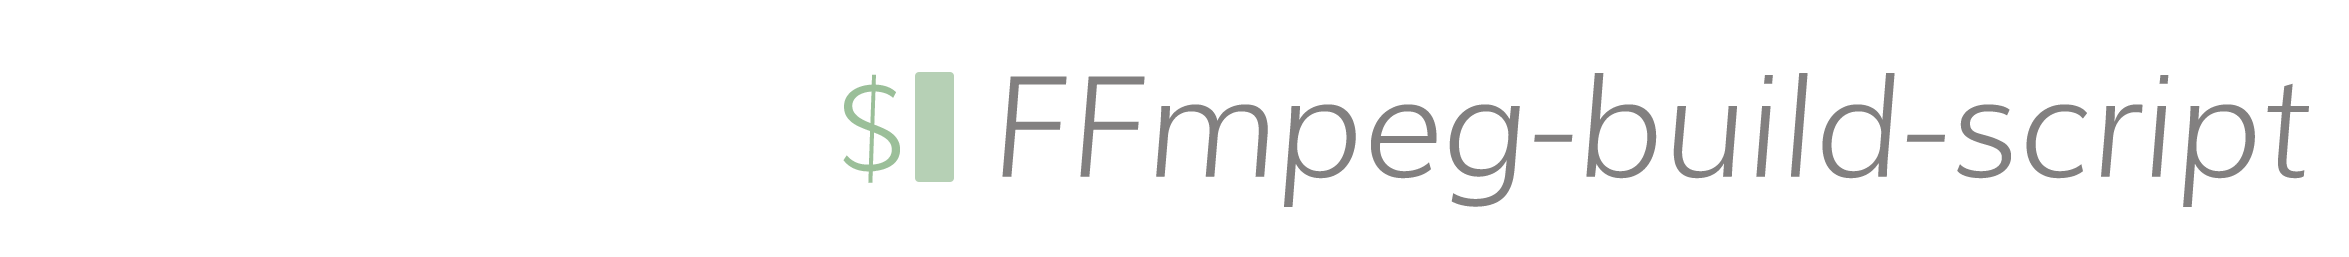 ffmpeg mp4 distribution legal issues